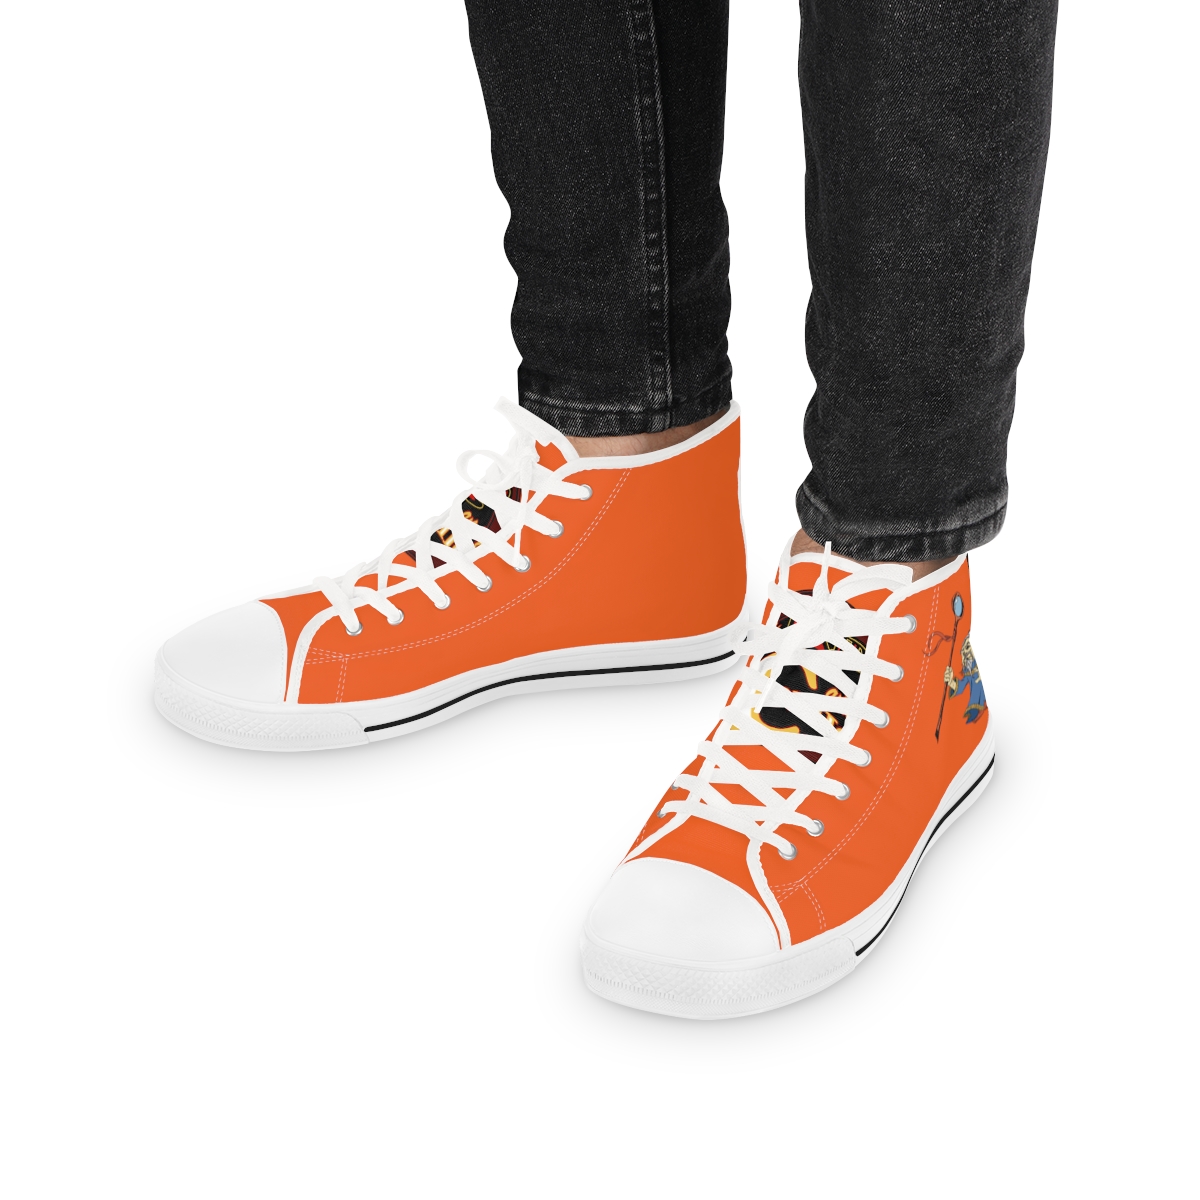 Men's High Top Sneakers product thumbnail image